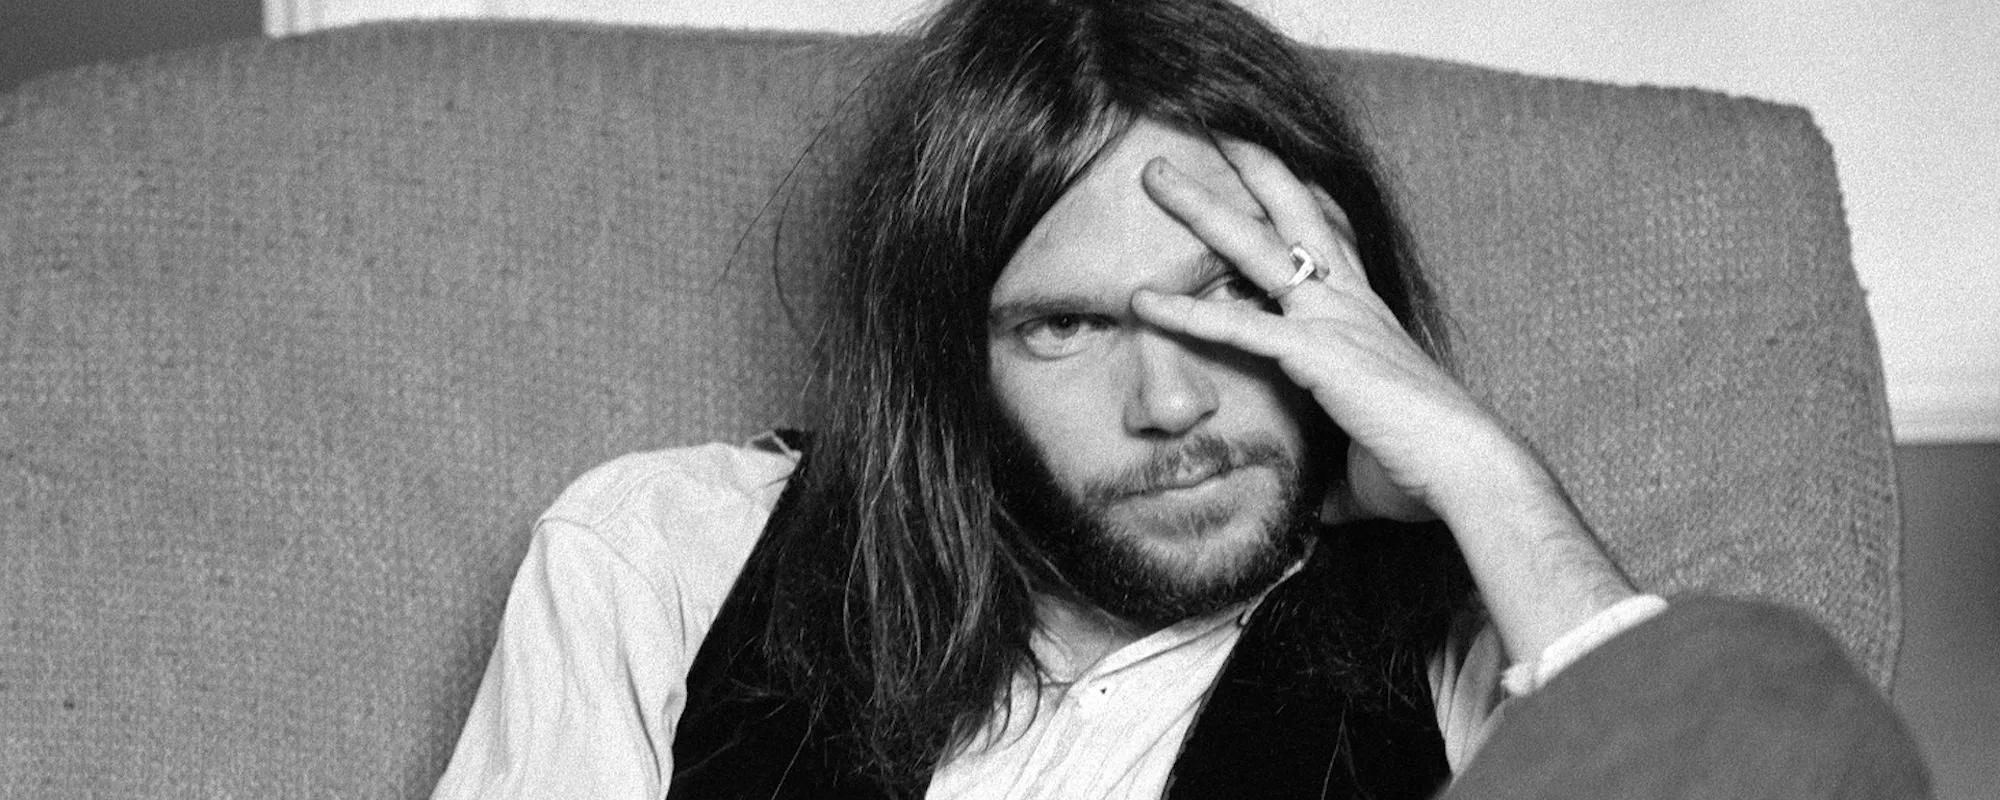 Neil Young is Not Happy with Beck’s “Old Man” Cover Appearing in Ad